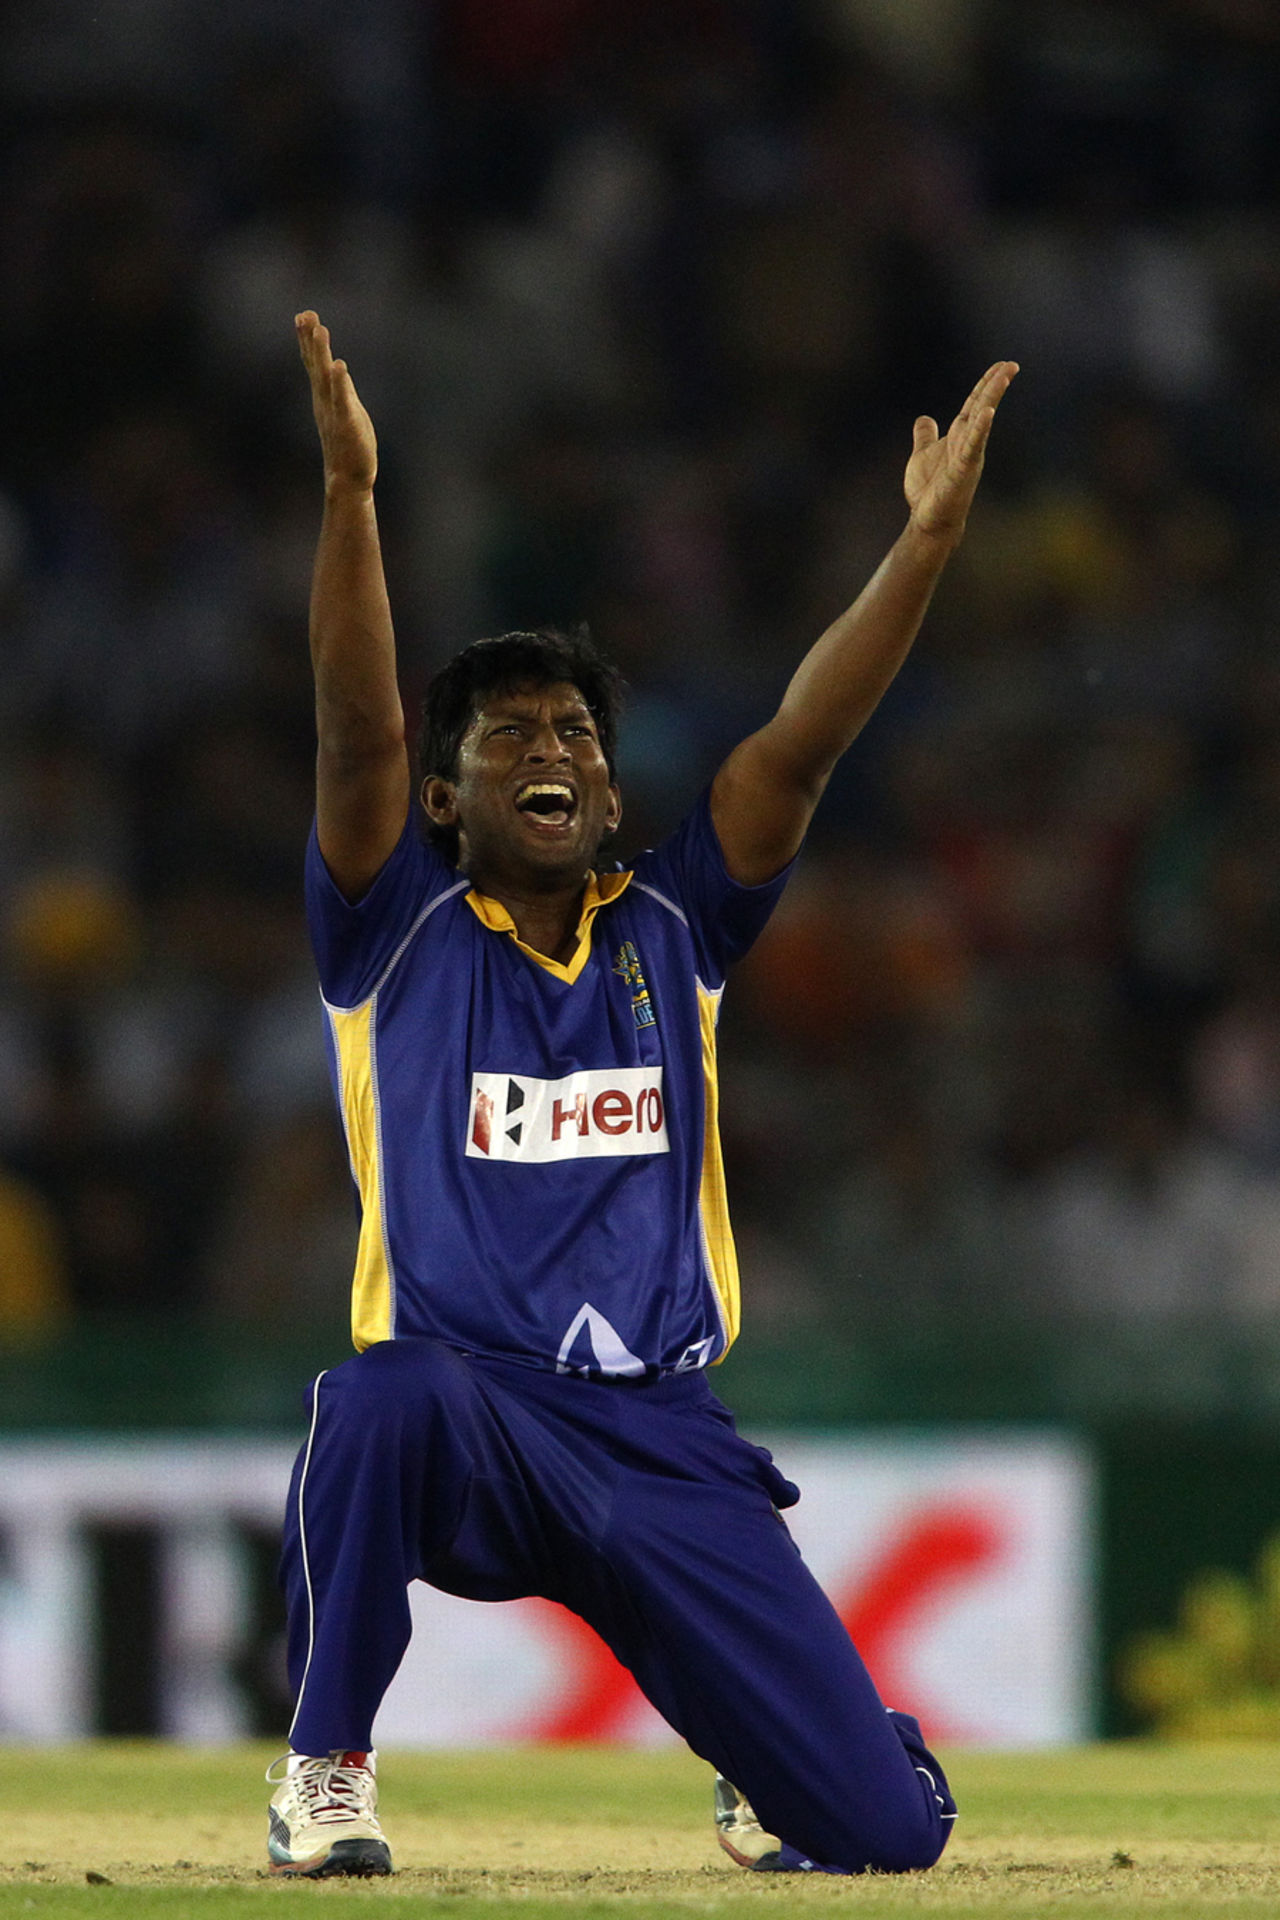 Jeevan Mendis pleads with the umpire, Kings XI Punjab v Barbados Tridents, Champions League T20, Mohali, September 20, 2014